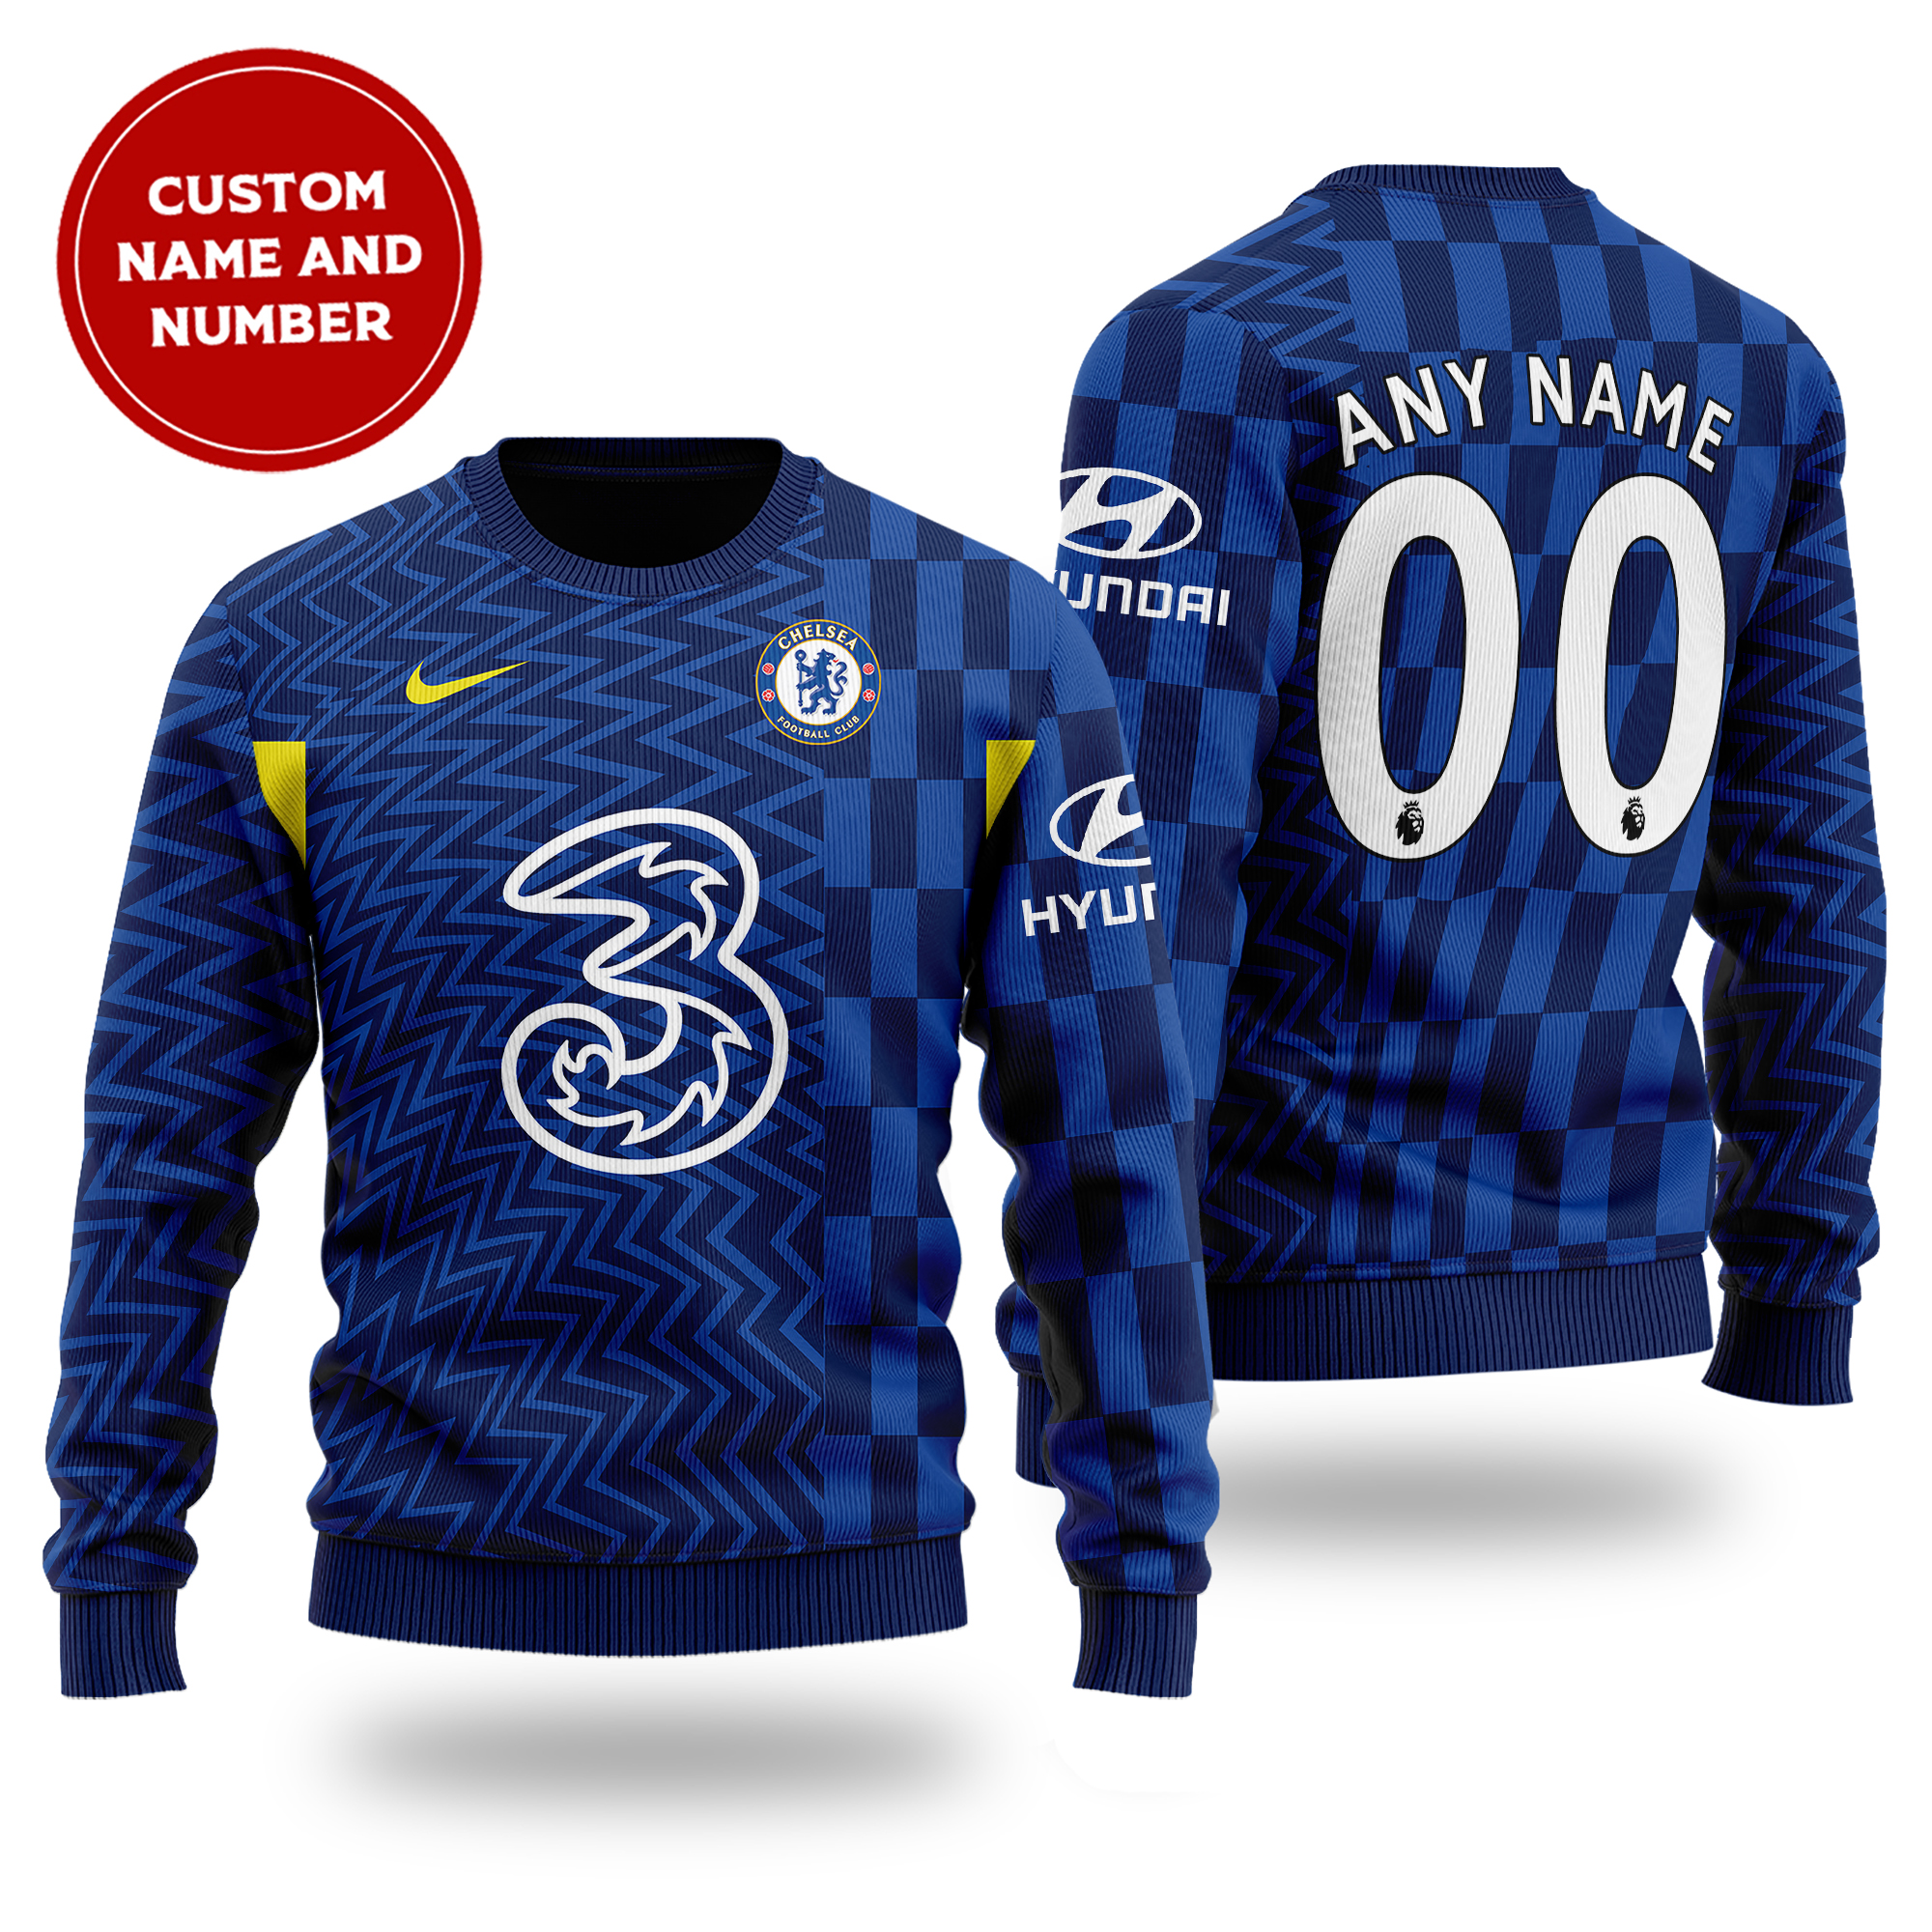 [ Amazing ] Primier League Chelsea FC cutom name and number sweater – Saleoff 261121